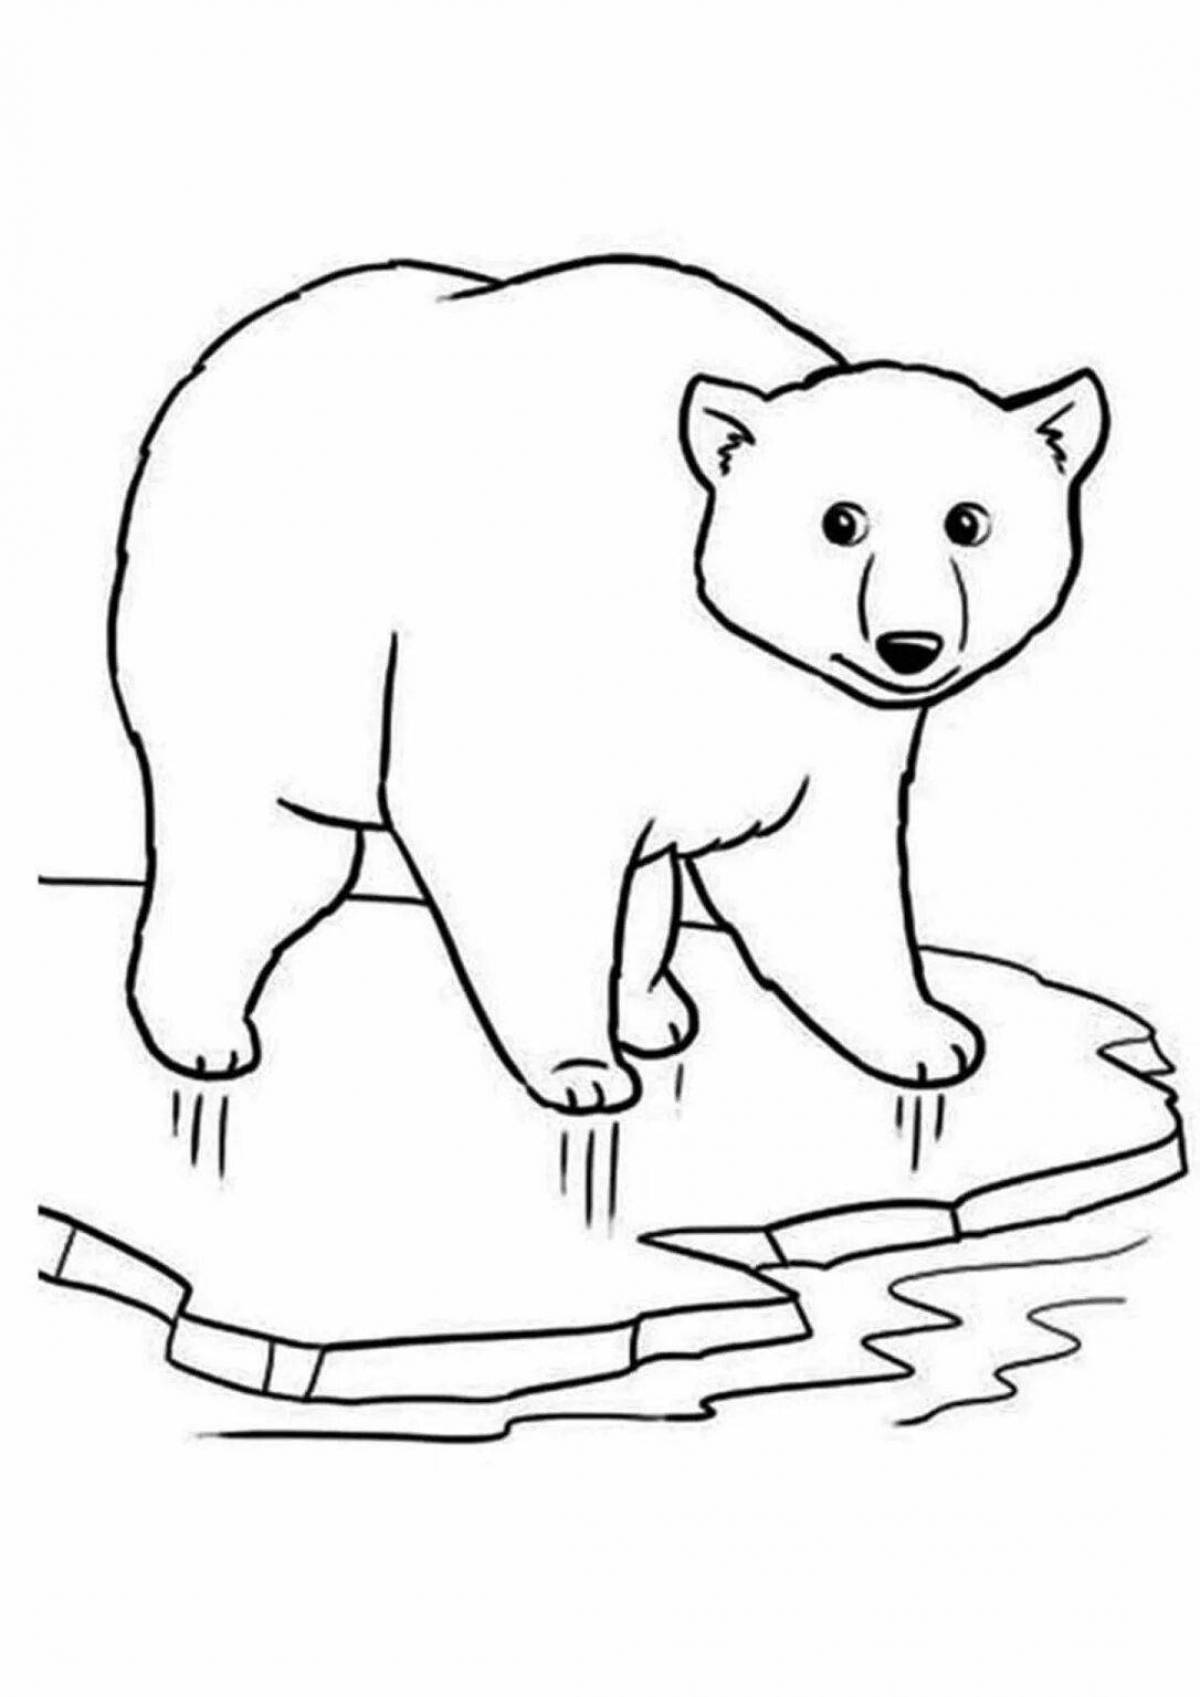 Amazing polar bear coloring page for 5-6 year olds